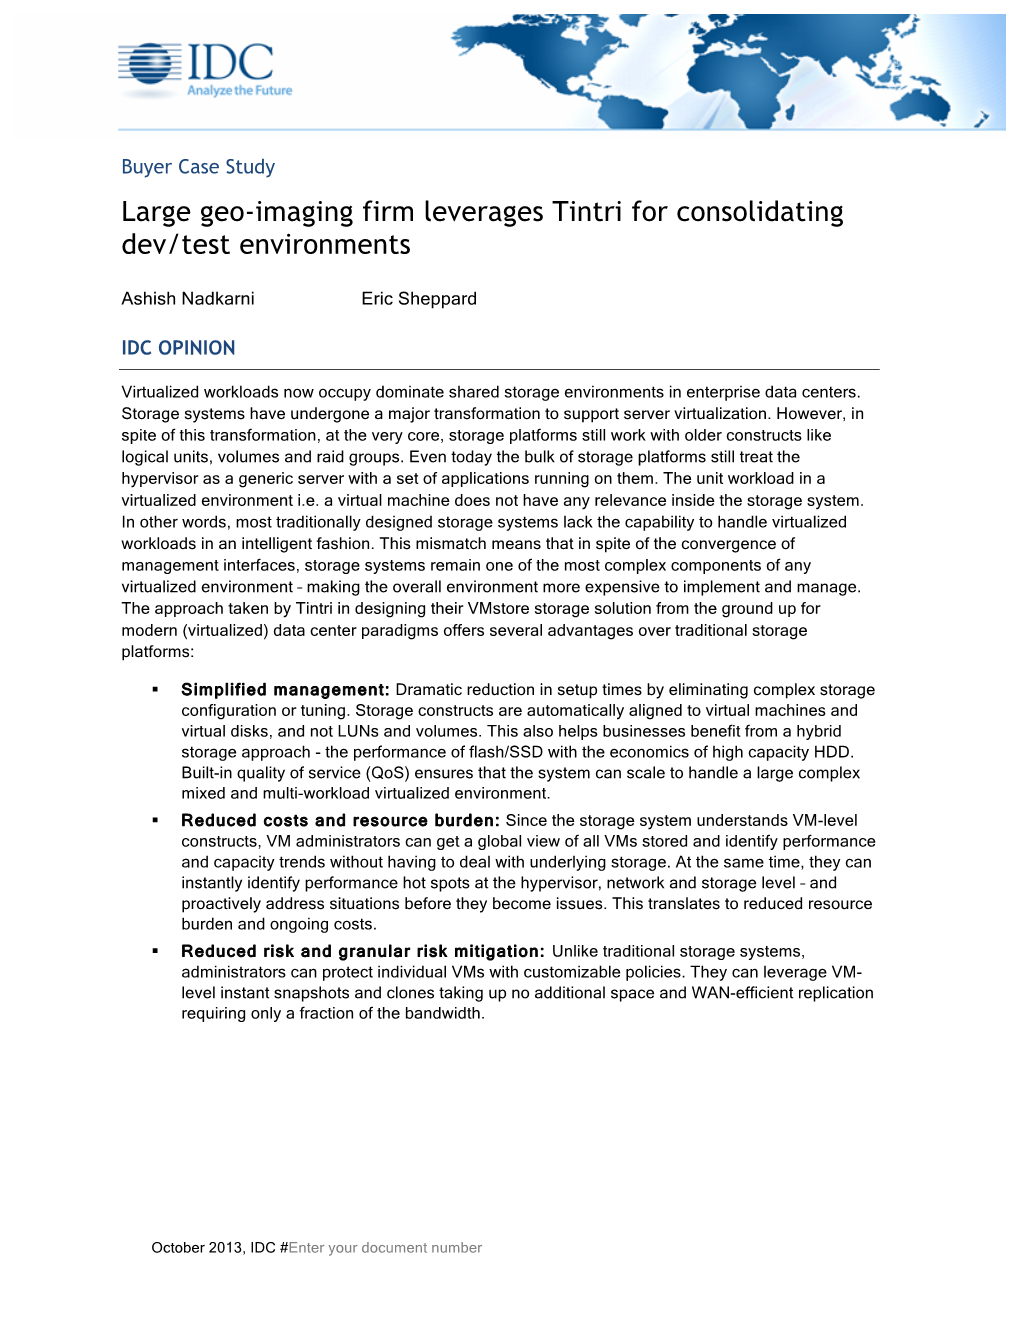 Large Geo-Imaging Firm Leverages Tintri for Consolidating Dev/Test Environments